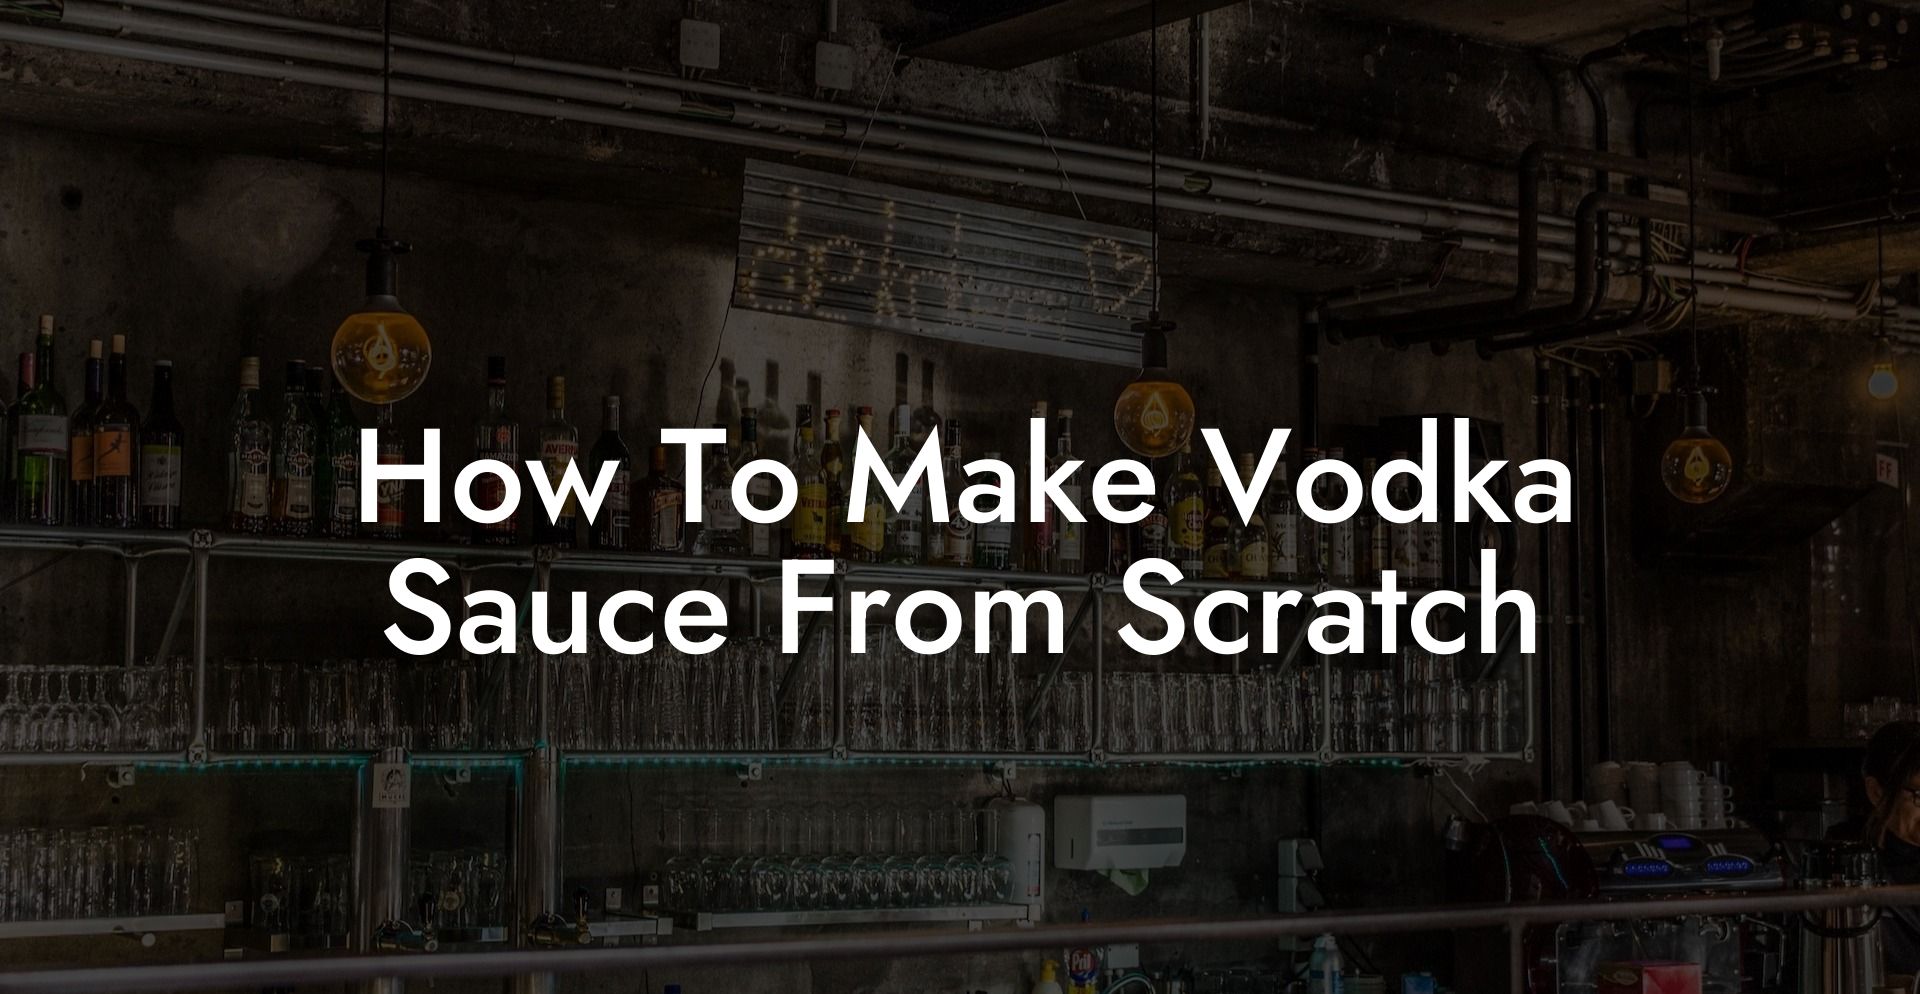 How To Make Vodka Sauce From Scratch